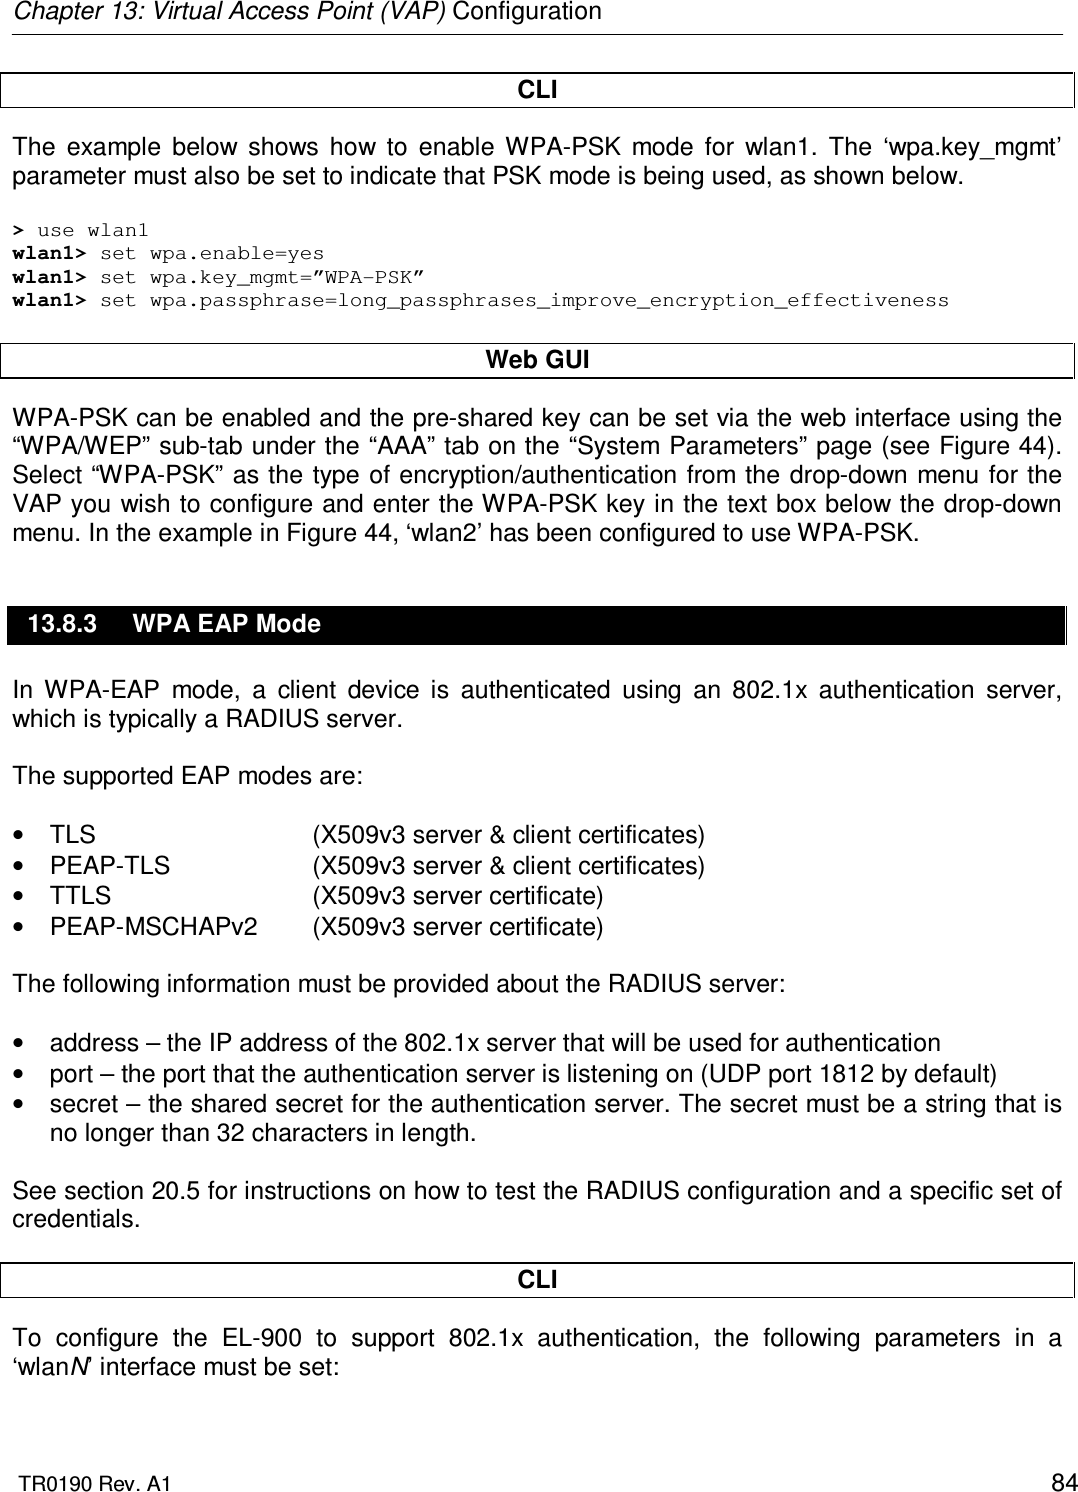 Chapter 13: Virtual Access Point (VAP) Configuration  TR0190 Rev. A1    84 CLI The  example  below  shows  how  to  enable  WPA-PSK  mode  for  wlan1.  The  ‘wpa.key_mgmt’ parameter must also be set to indicate that PSK mode is being used, as shown below.  &gt; use wlan1 wlan1&gt; set wpa.enable=yes wlan1&gt; set wpa.key_mgmt=”WPA-PSK” wlan1&gt; set wpa.passphrase=long_passphrases_improve_encryption_effectiveness  Web GUI WPA-PSK can be enabled and the pre-shared key can be set via the web interface using the “WPA/WEP” sub-tab under the “AAA” tab on the “System Parameters” page (see Figure 44). Select “WPA-PSK” as the type of encryption/authentication from the drop-down menu for the VAP you wish to configure and enter the WPA-PSK key in the text box below the drop-down menu. In the example in Figure 44, ‘wlan2’ has been configured to use WPA-PSK. 13.8.3  WPA EAP Mode In  WPA-EAP  mode,  a  client  device  is  authenticated  using  an  802.1x  authentication  server, which is typically a RADIUS server.   The supported EAP modes are:  •  TLS      (X509v3 server &amp; client certificates) •  PEAP-TLS    (X509v3 server &amp; client certificates) •  TTLS      (X509v3 server certificate) •  PEAP-MSCHAPv2  (X509v3 server certificate)  The following information must be provided about the RADIUS server:  •  address – the IP address of the 802.1x server that will be used for authentication •  port – the port that the authentication server is listening on (UDP port 1812 by default) •  secret – the shared secret for the authentication server. The secret must be a string that is no longer than 32 characters in length.  See section 20.5 for instructions on how to test the RADIUS configuration and a specific set of credentials.  CLI To  configure  the  EL-900  to  support  802.1x  authentication,  the  following  parameters  in  a ‘wlanN’ interface must be set:  